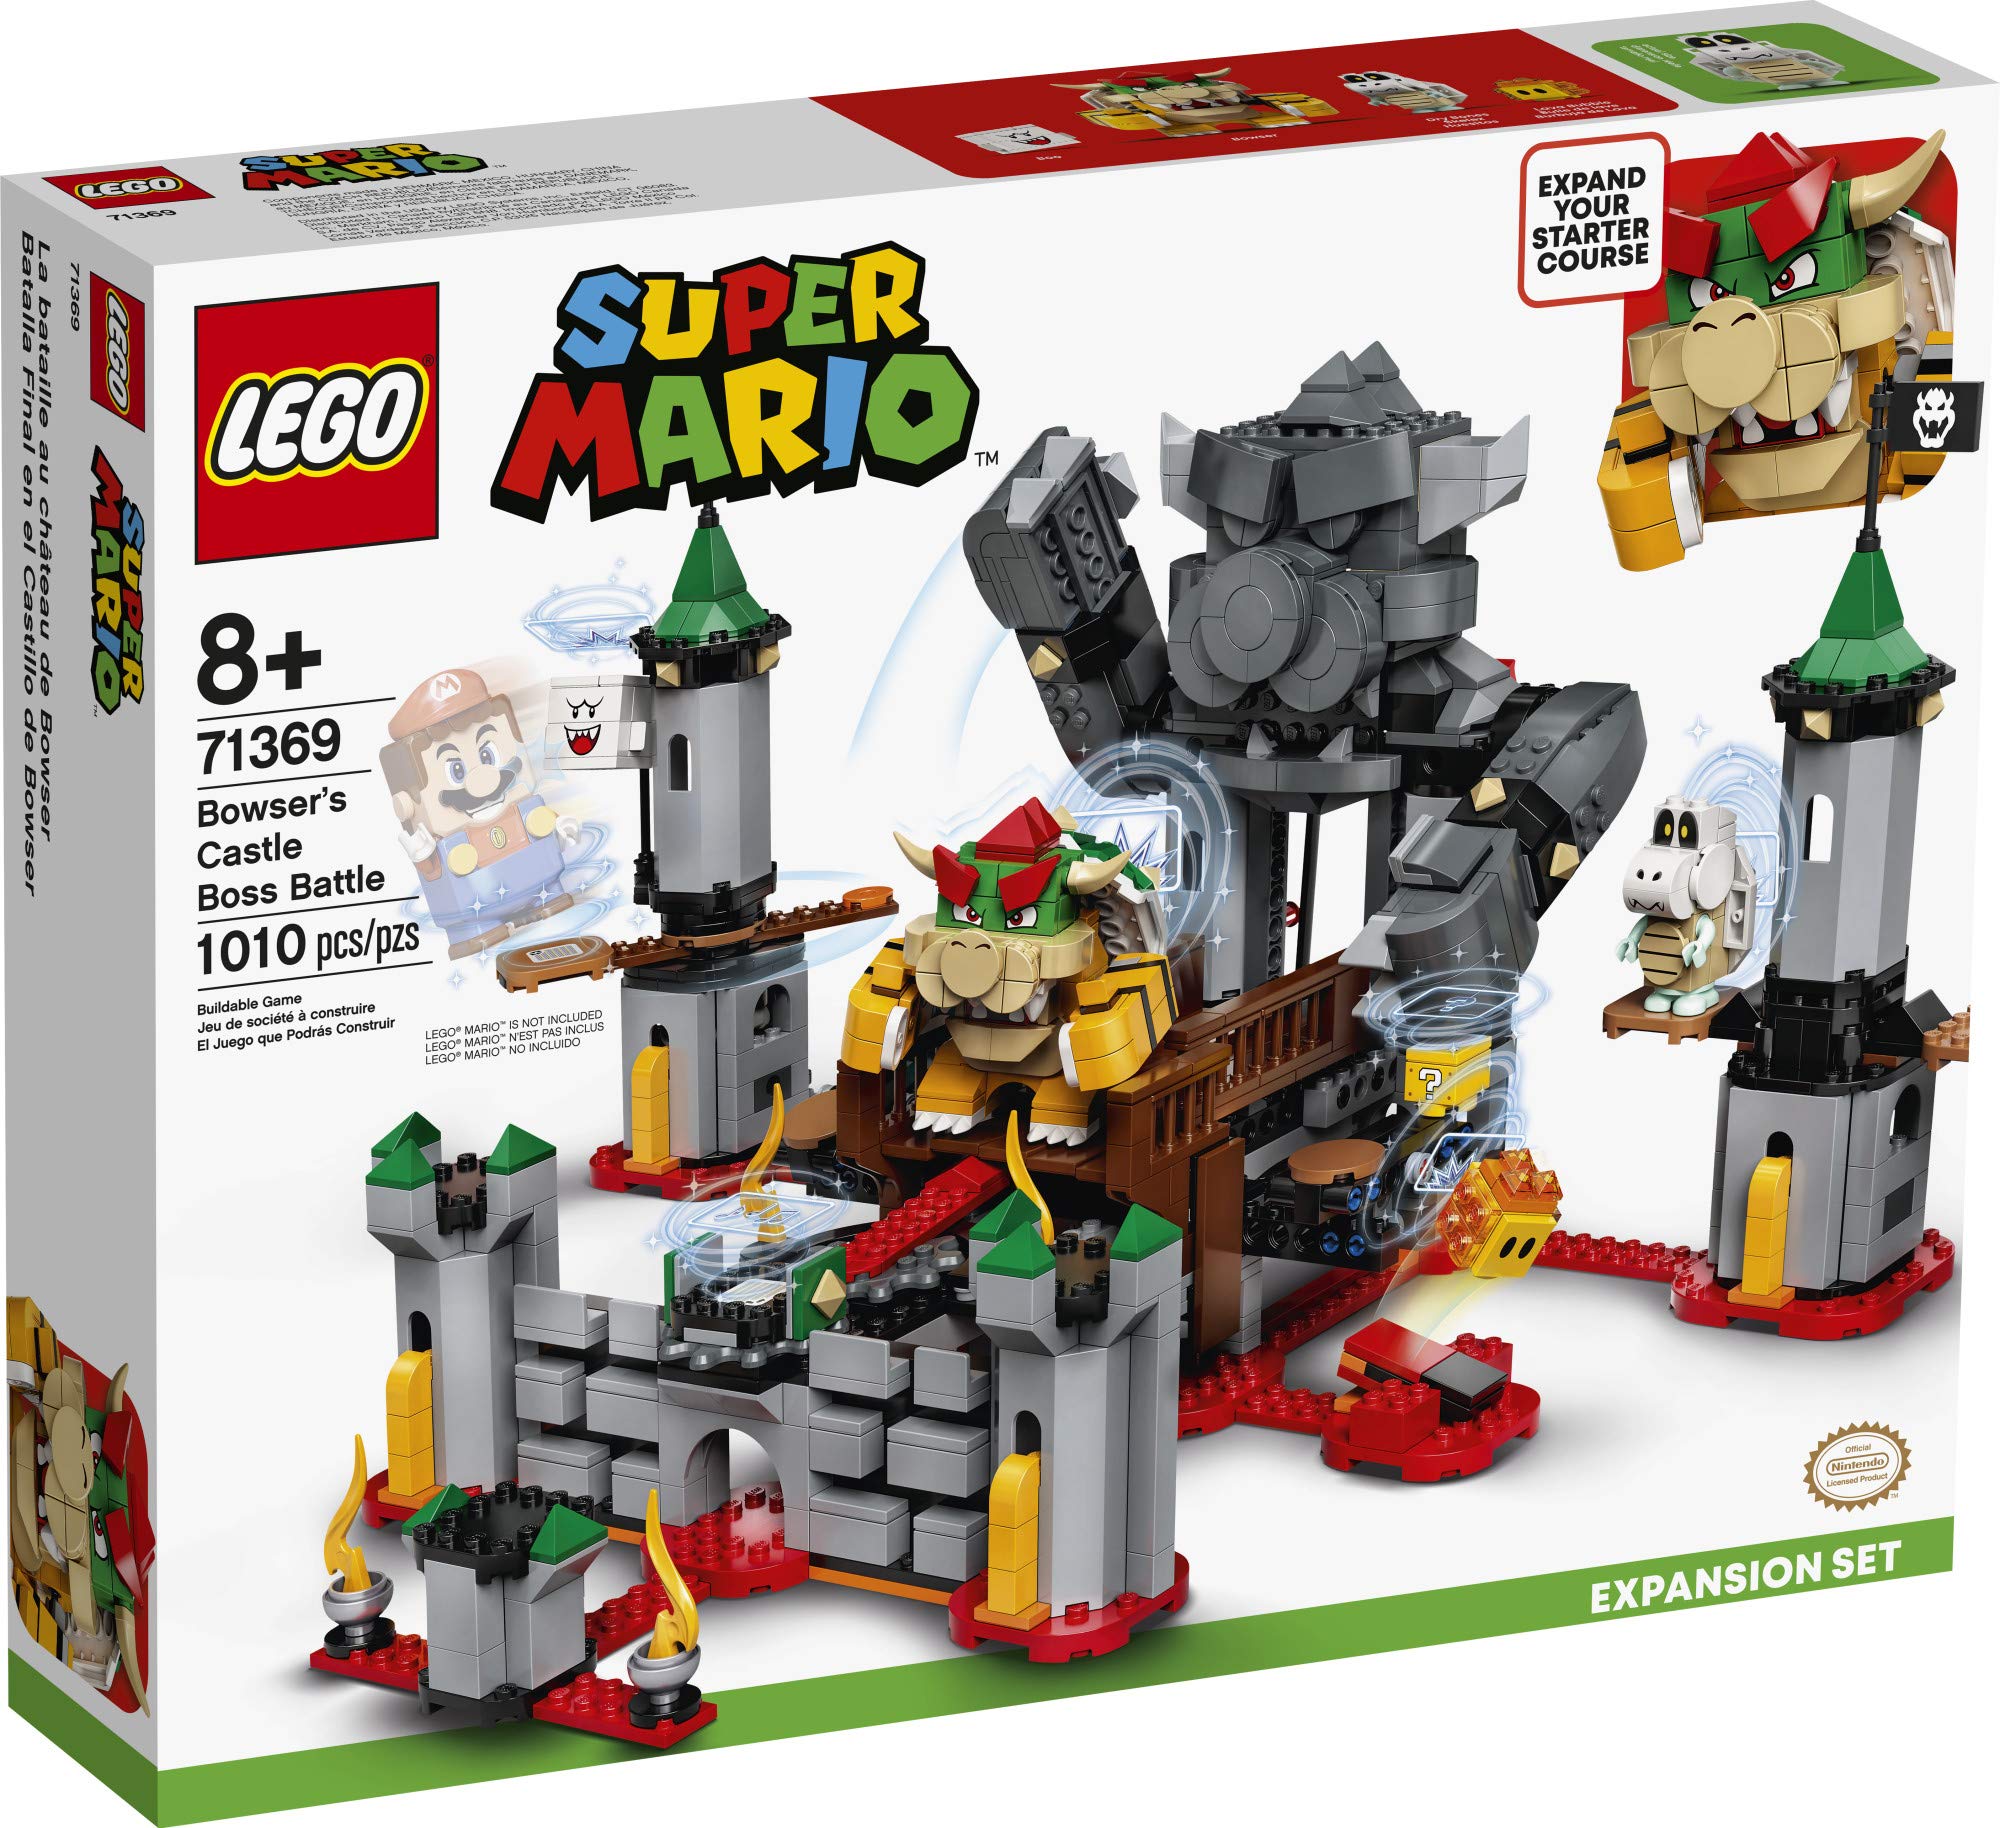 LEGO Super Mario Bowser's Castle Boss Battle Expansion Set 71369 Building Kit; Collectible Toy for Kids to Customize Their Super Mario Starter Course (71360) Playset (1,010 Pieces)